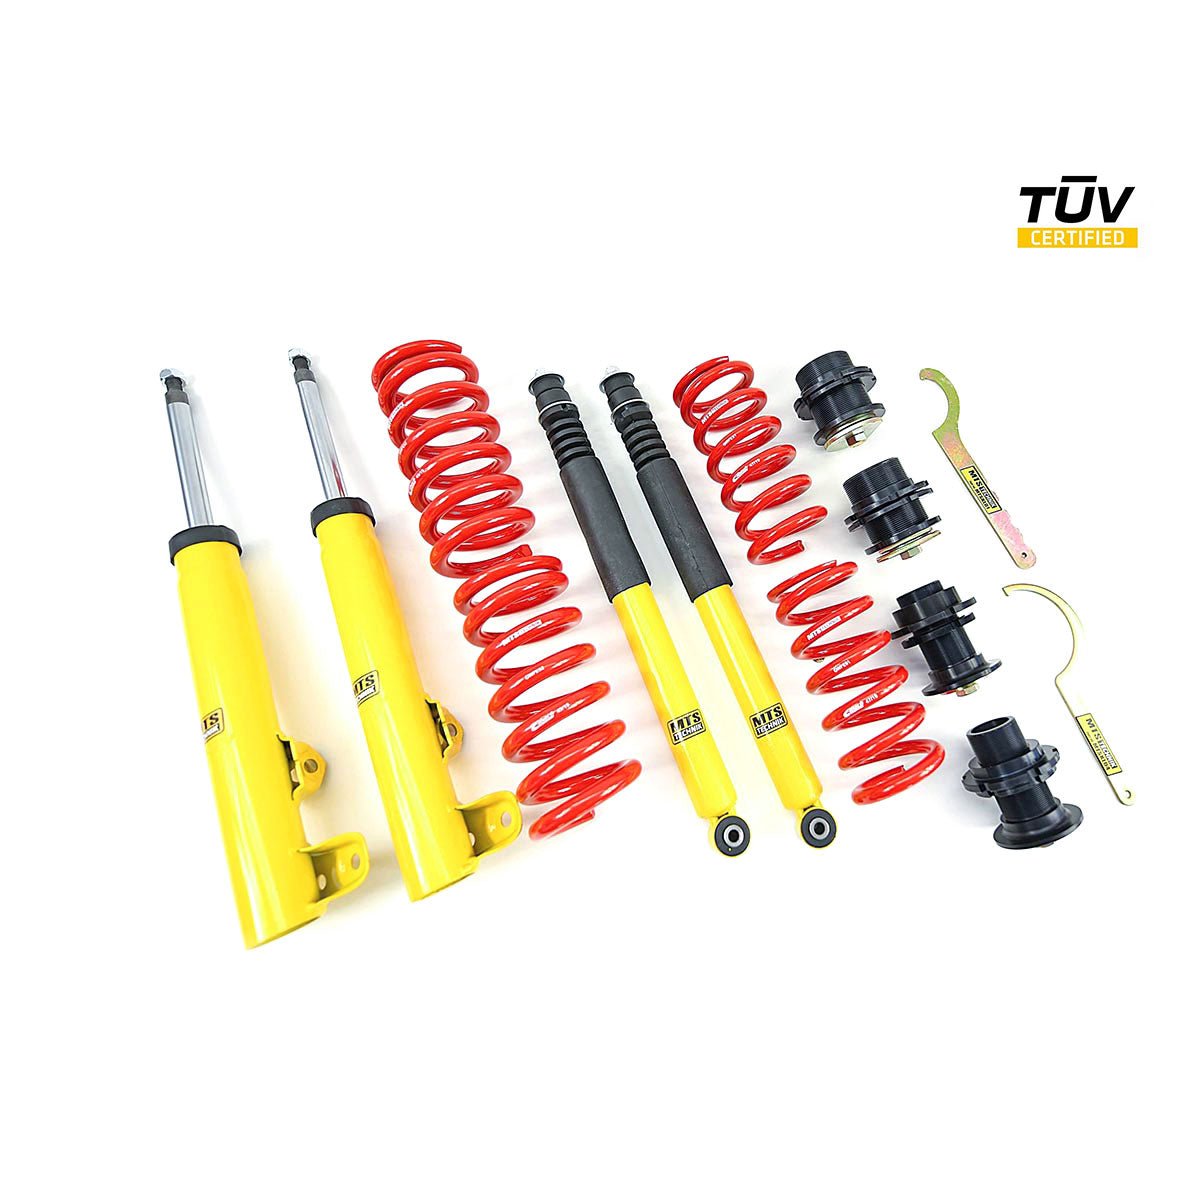 MTS TECHNIK coilover kit STREET Mercedes-Benz W201 (with TÜV) - PARTS33 GmbH